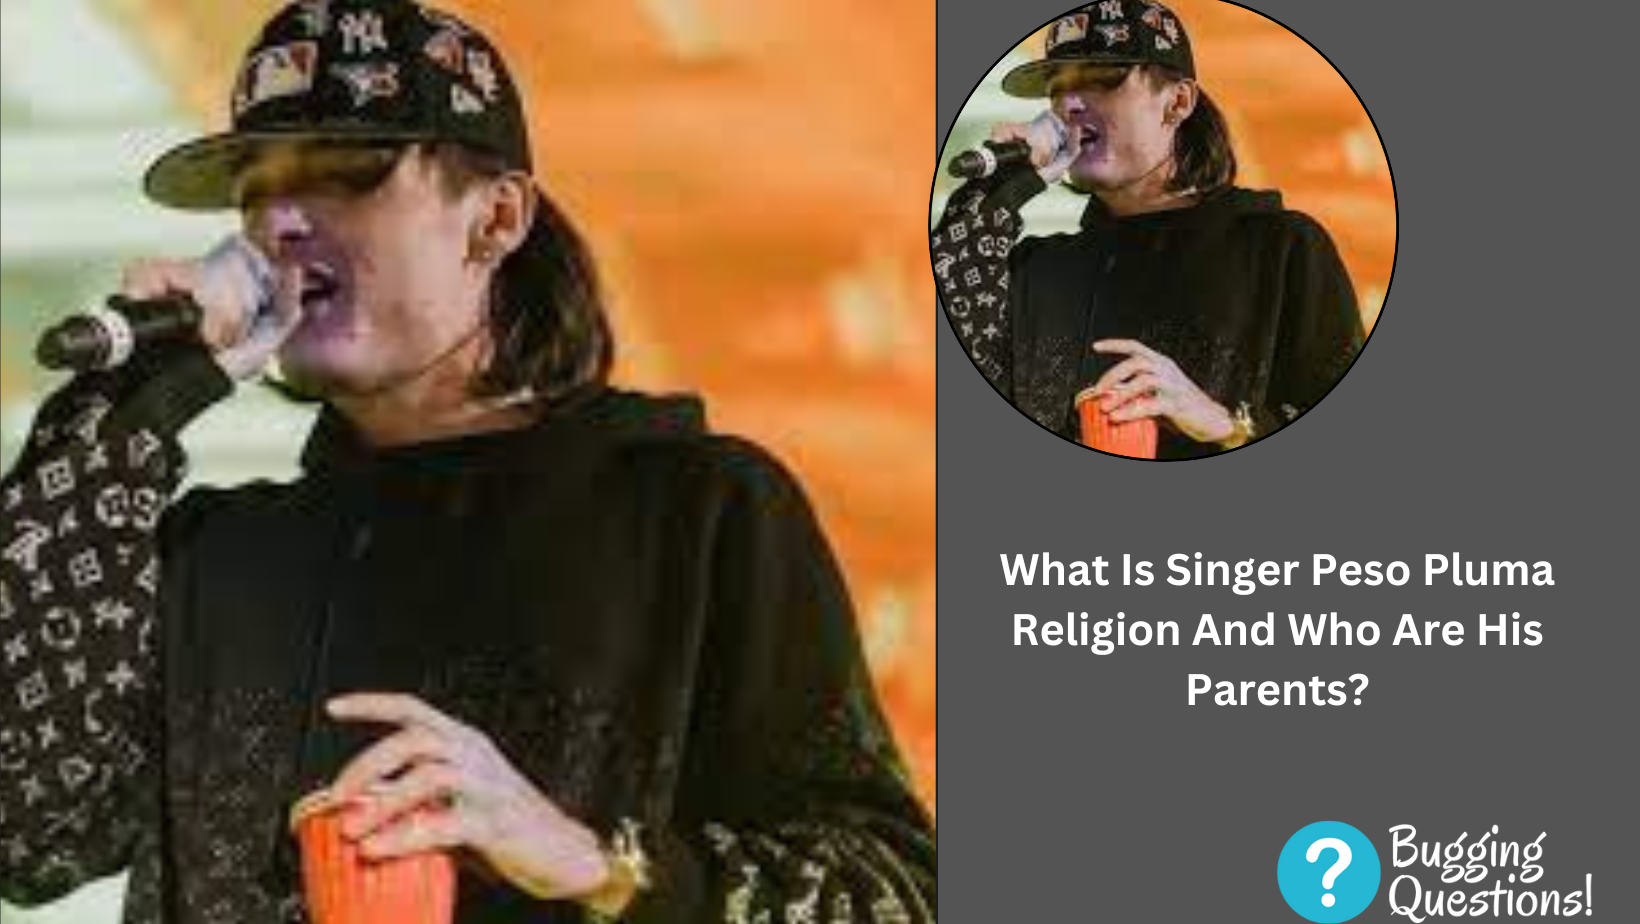 What Is Singer Peso Pluma Religion And Who Are His Parents?